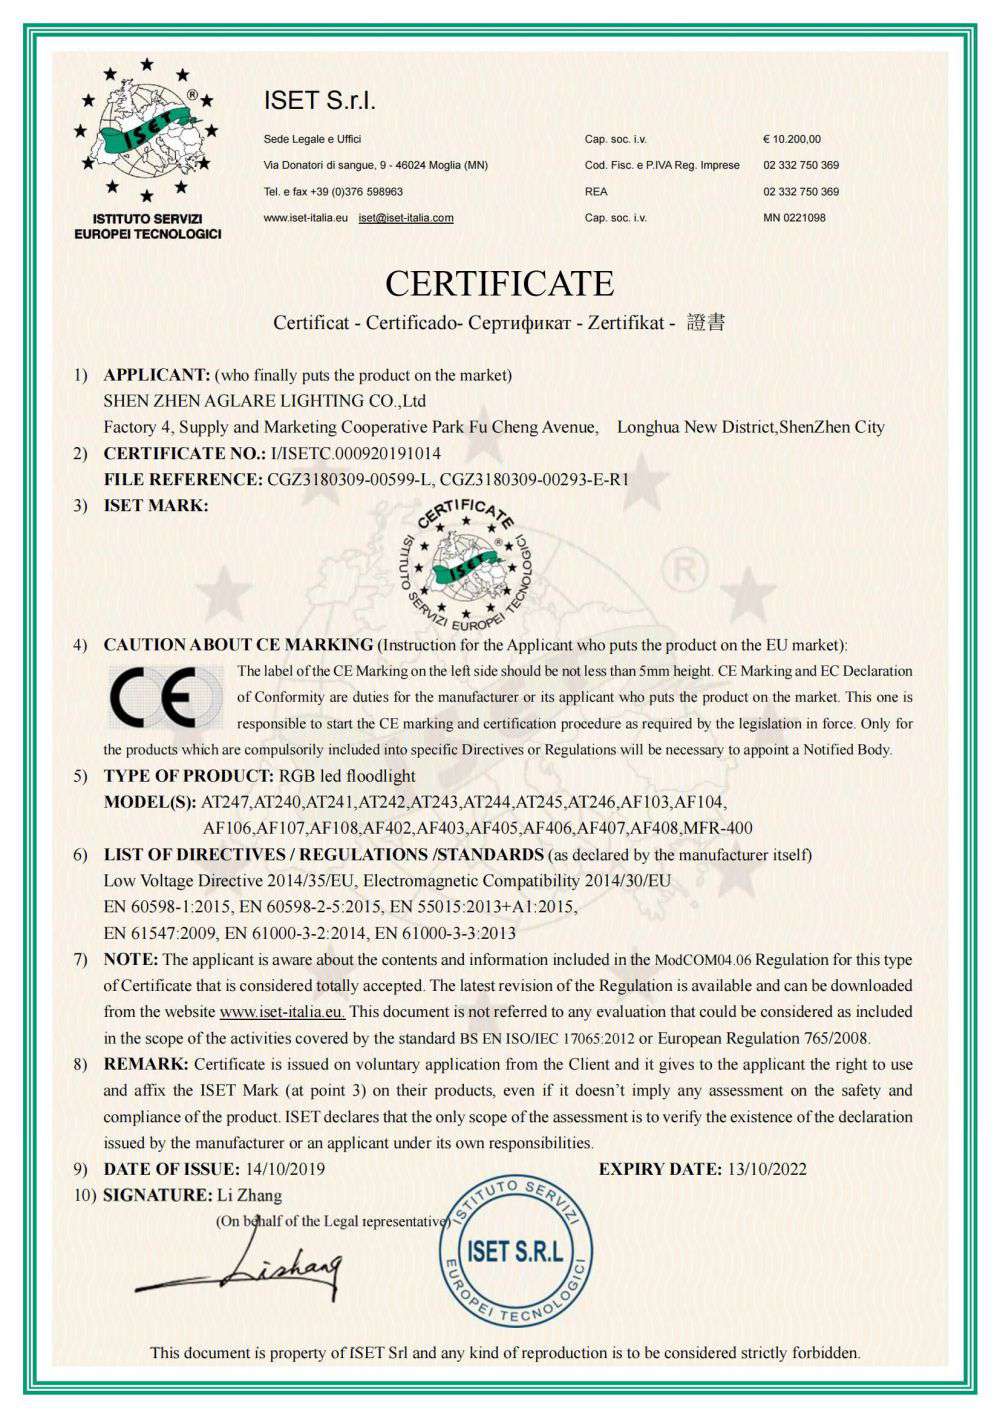 Aglare Lighing's products are certified CE by European ISETS